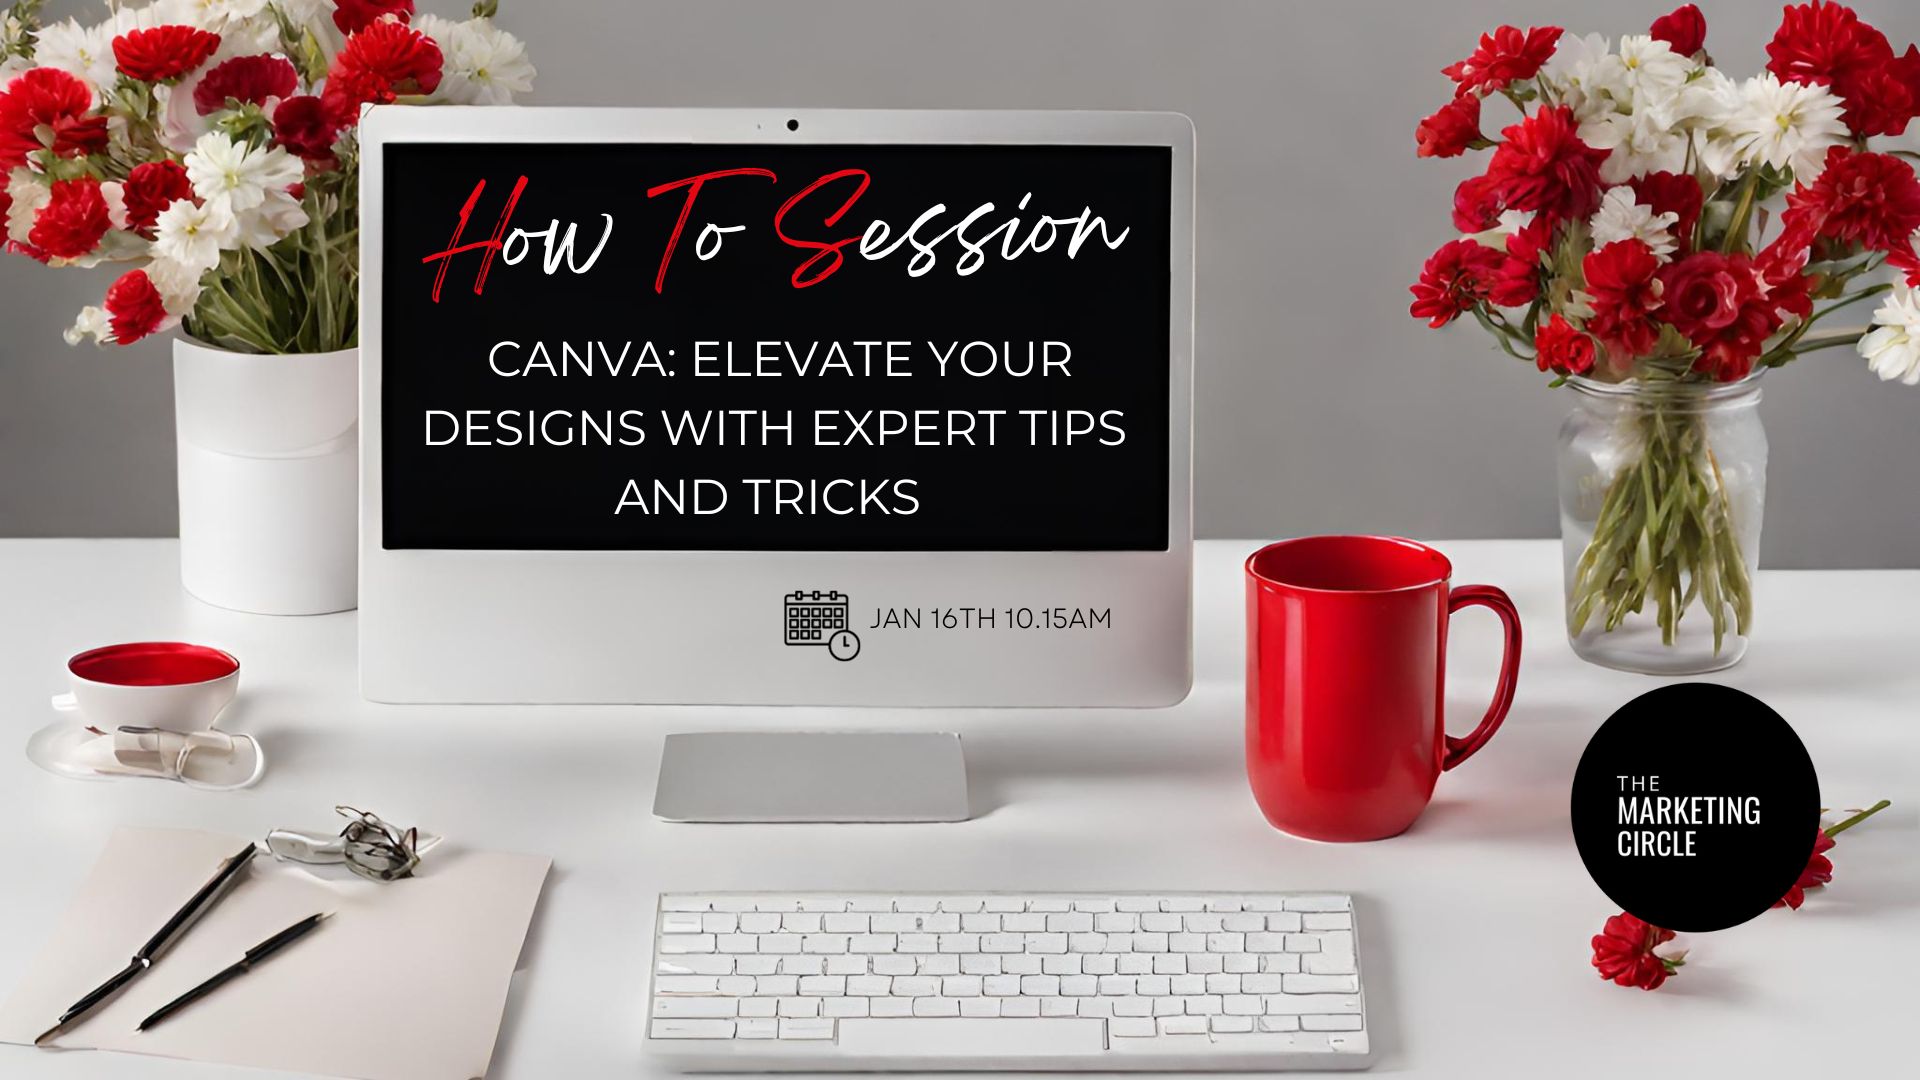 How to session can you elevate your design with experts and tips.